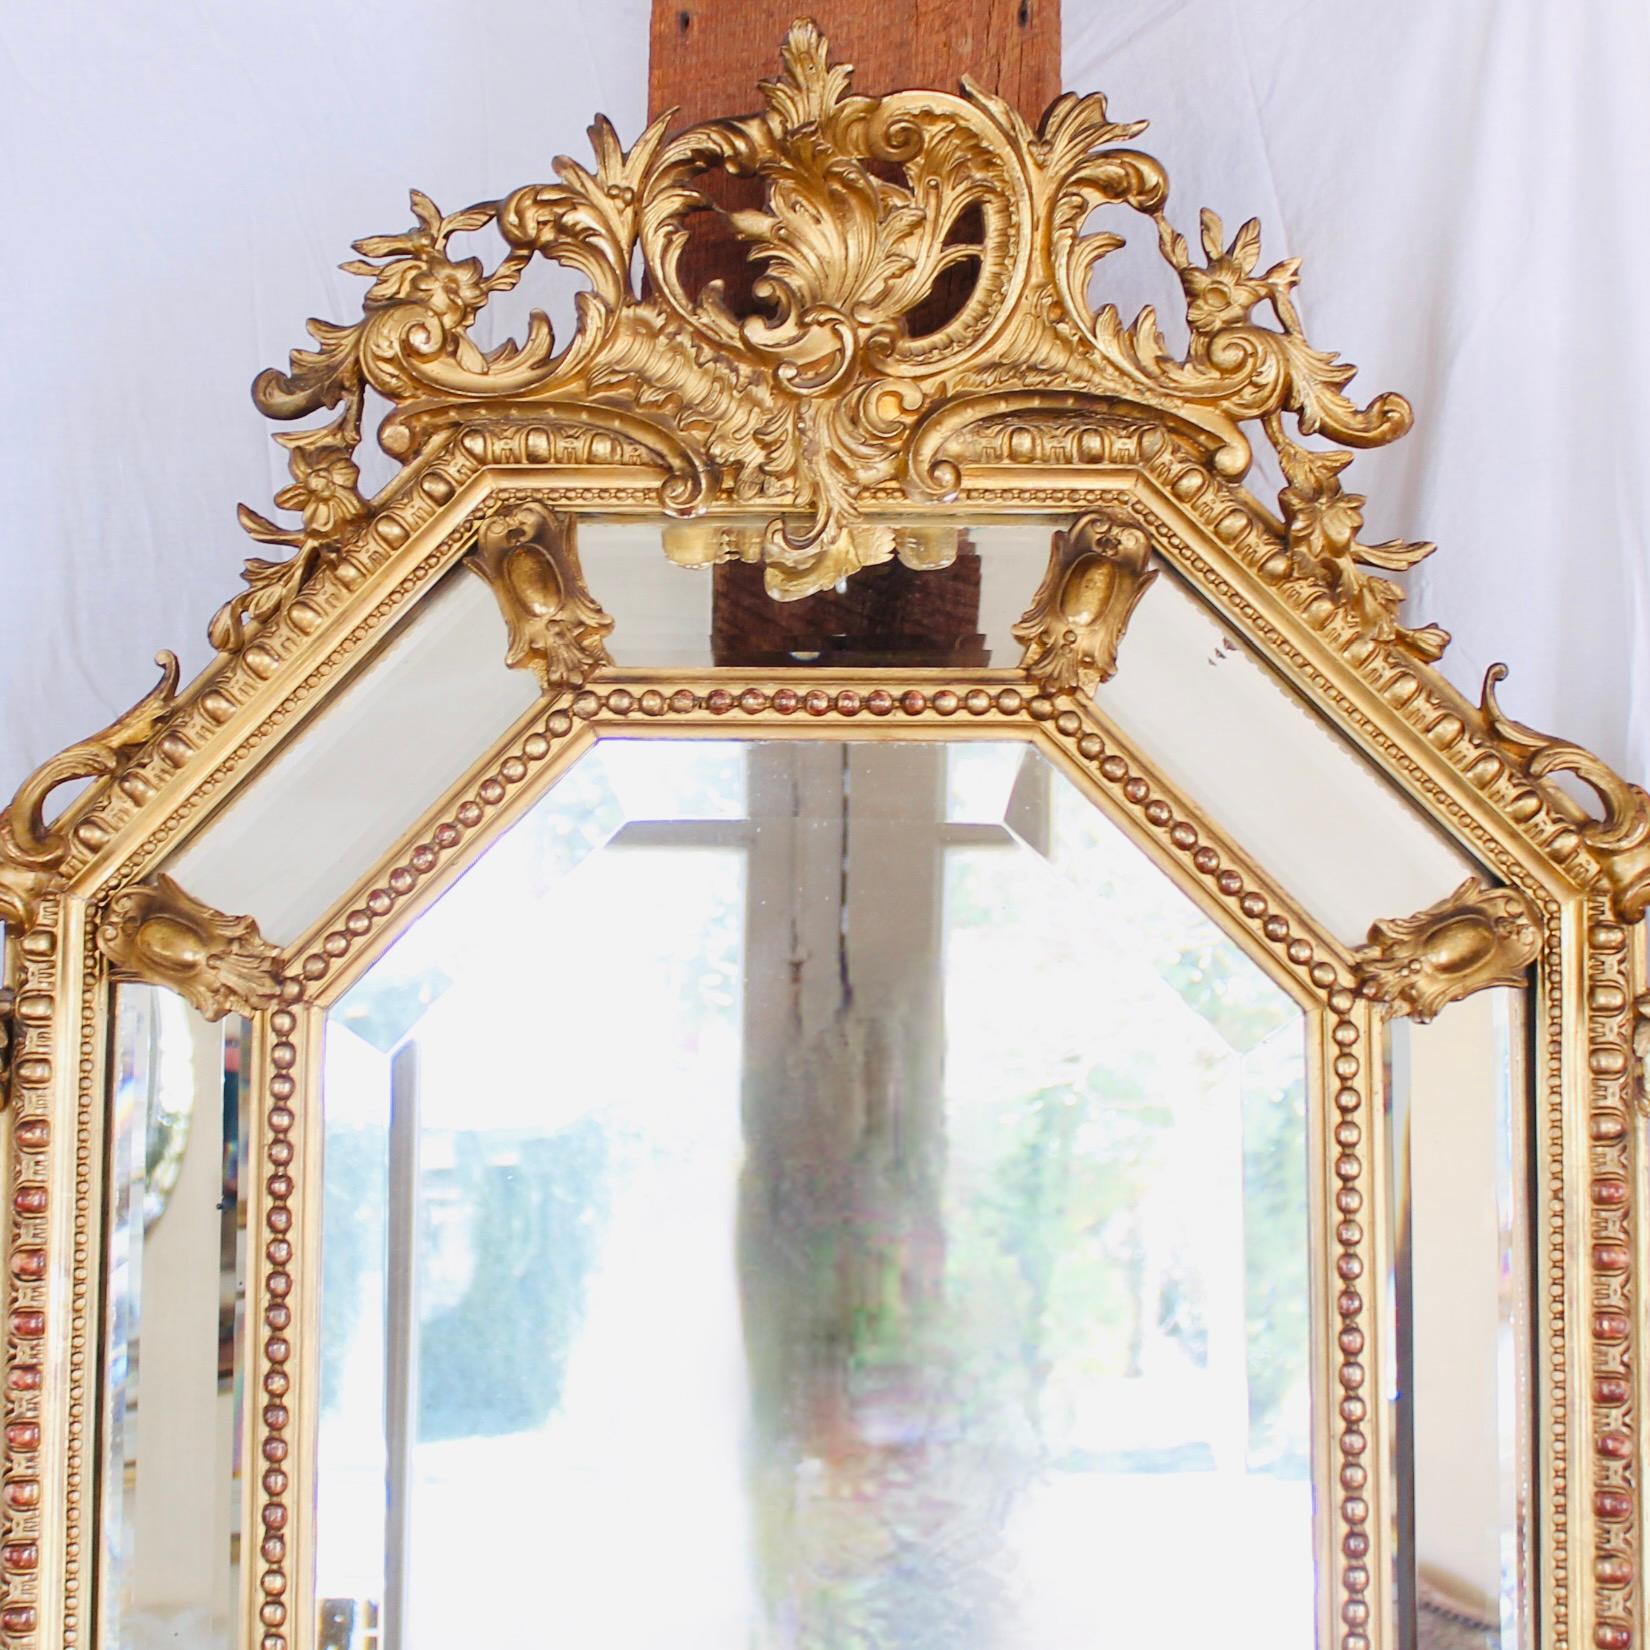 An eye-catching confection of Rococo decorative elements, combined in a cushion mirror with sober classical architectural moldings: egg and dart with pearl edging arranged in an octagonal format around a central mirror plate. The crest is